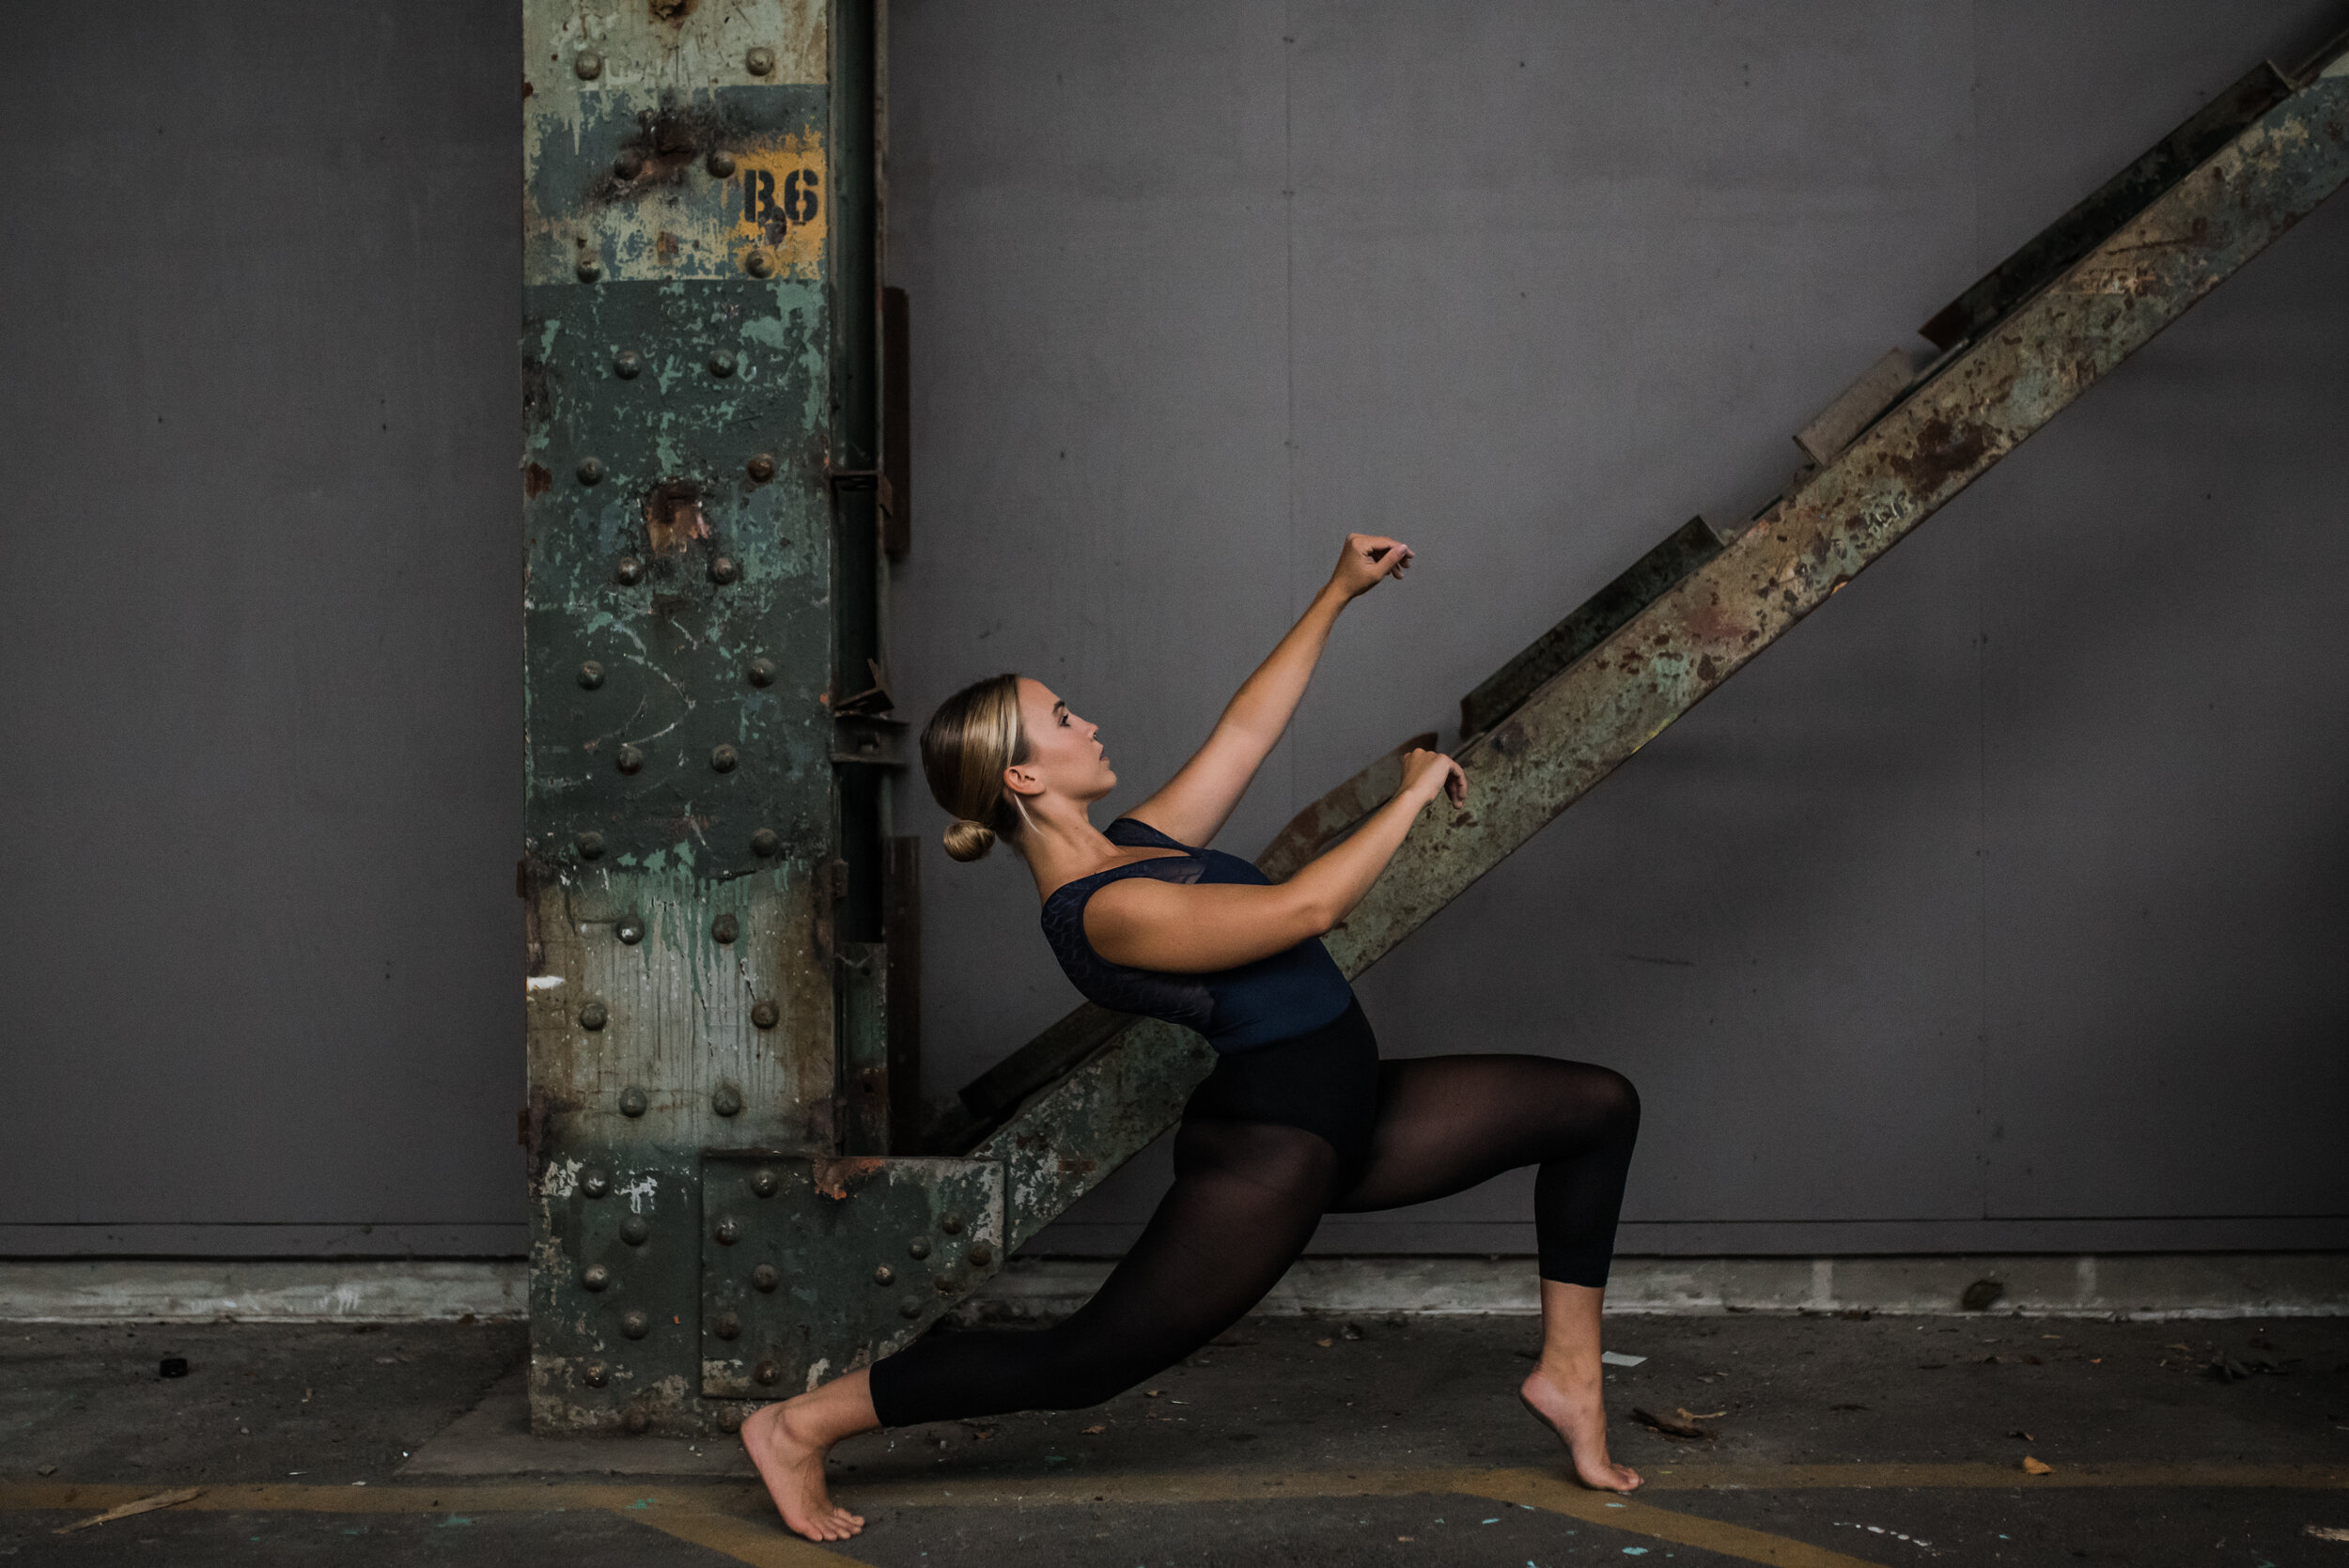 Dancer Alex wanted an edgy vibe for her dancing portraits and the Navy Yard did not disappoint!